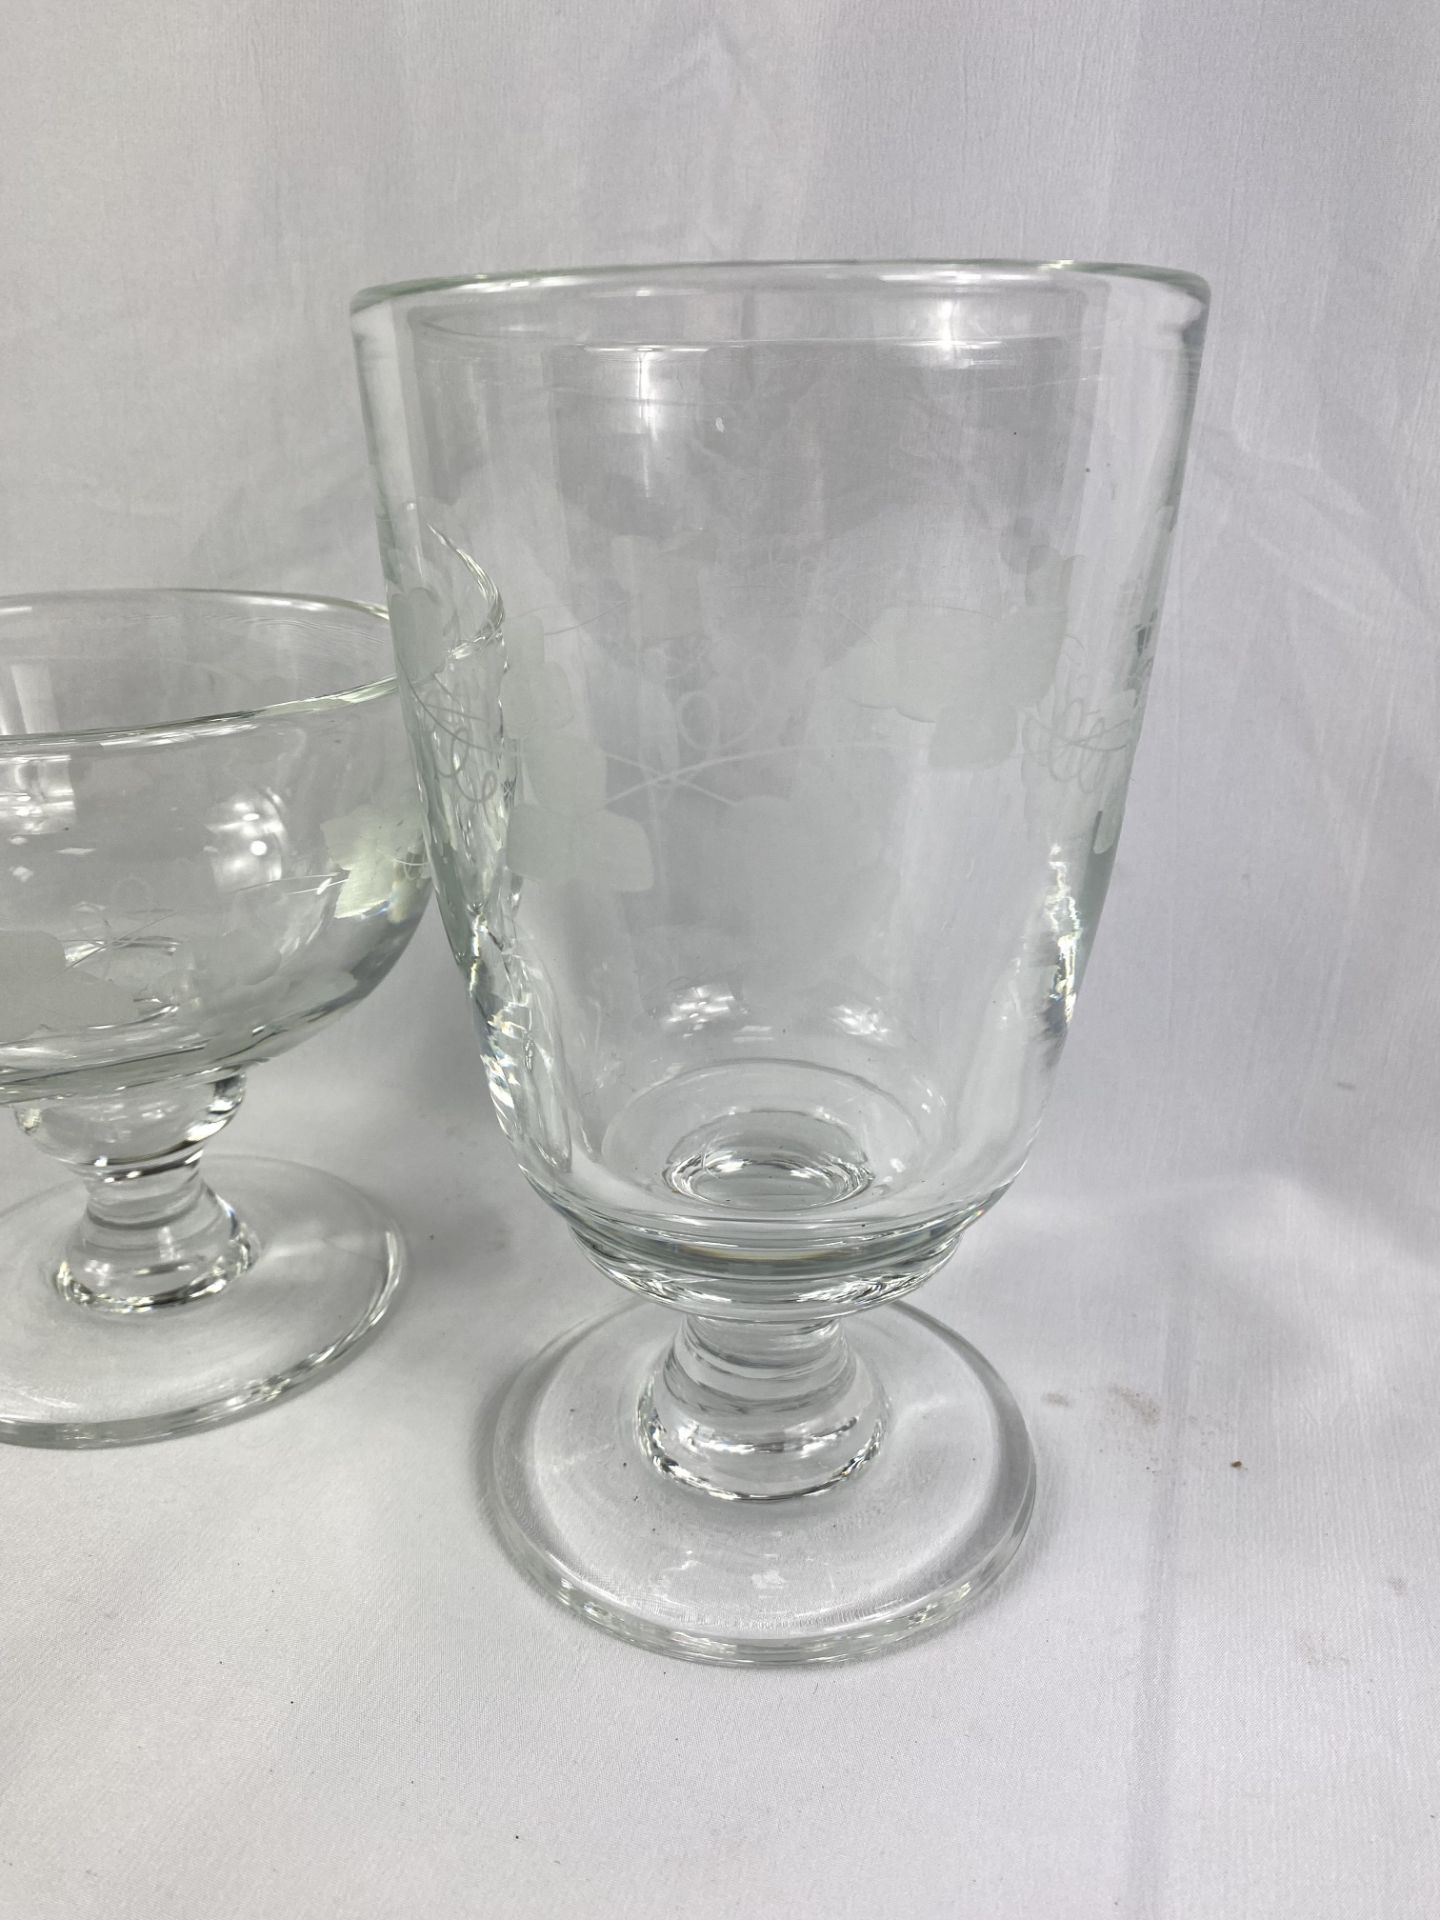 Glass vase and bowl with acid etched decoration - Image 2 of 4